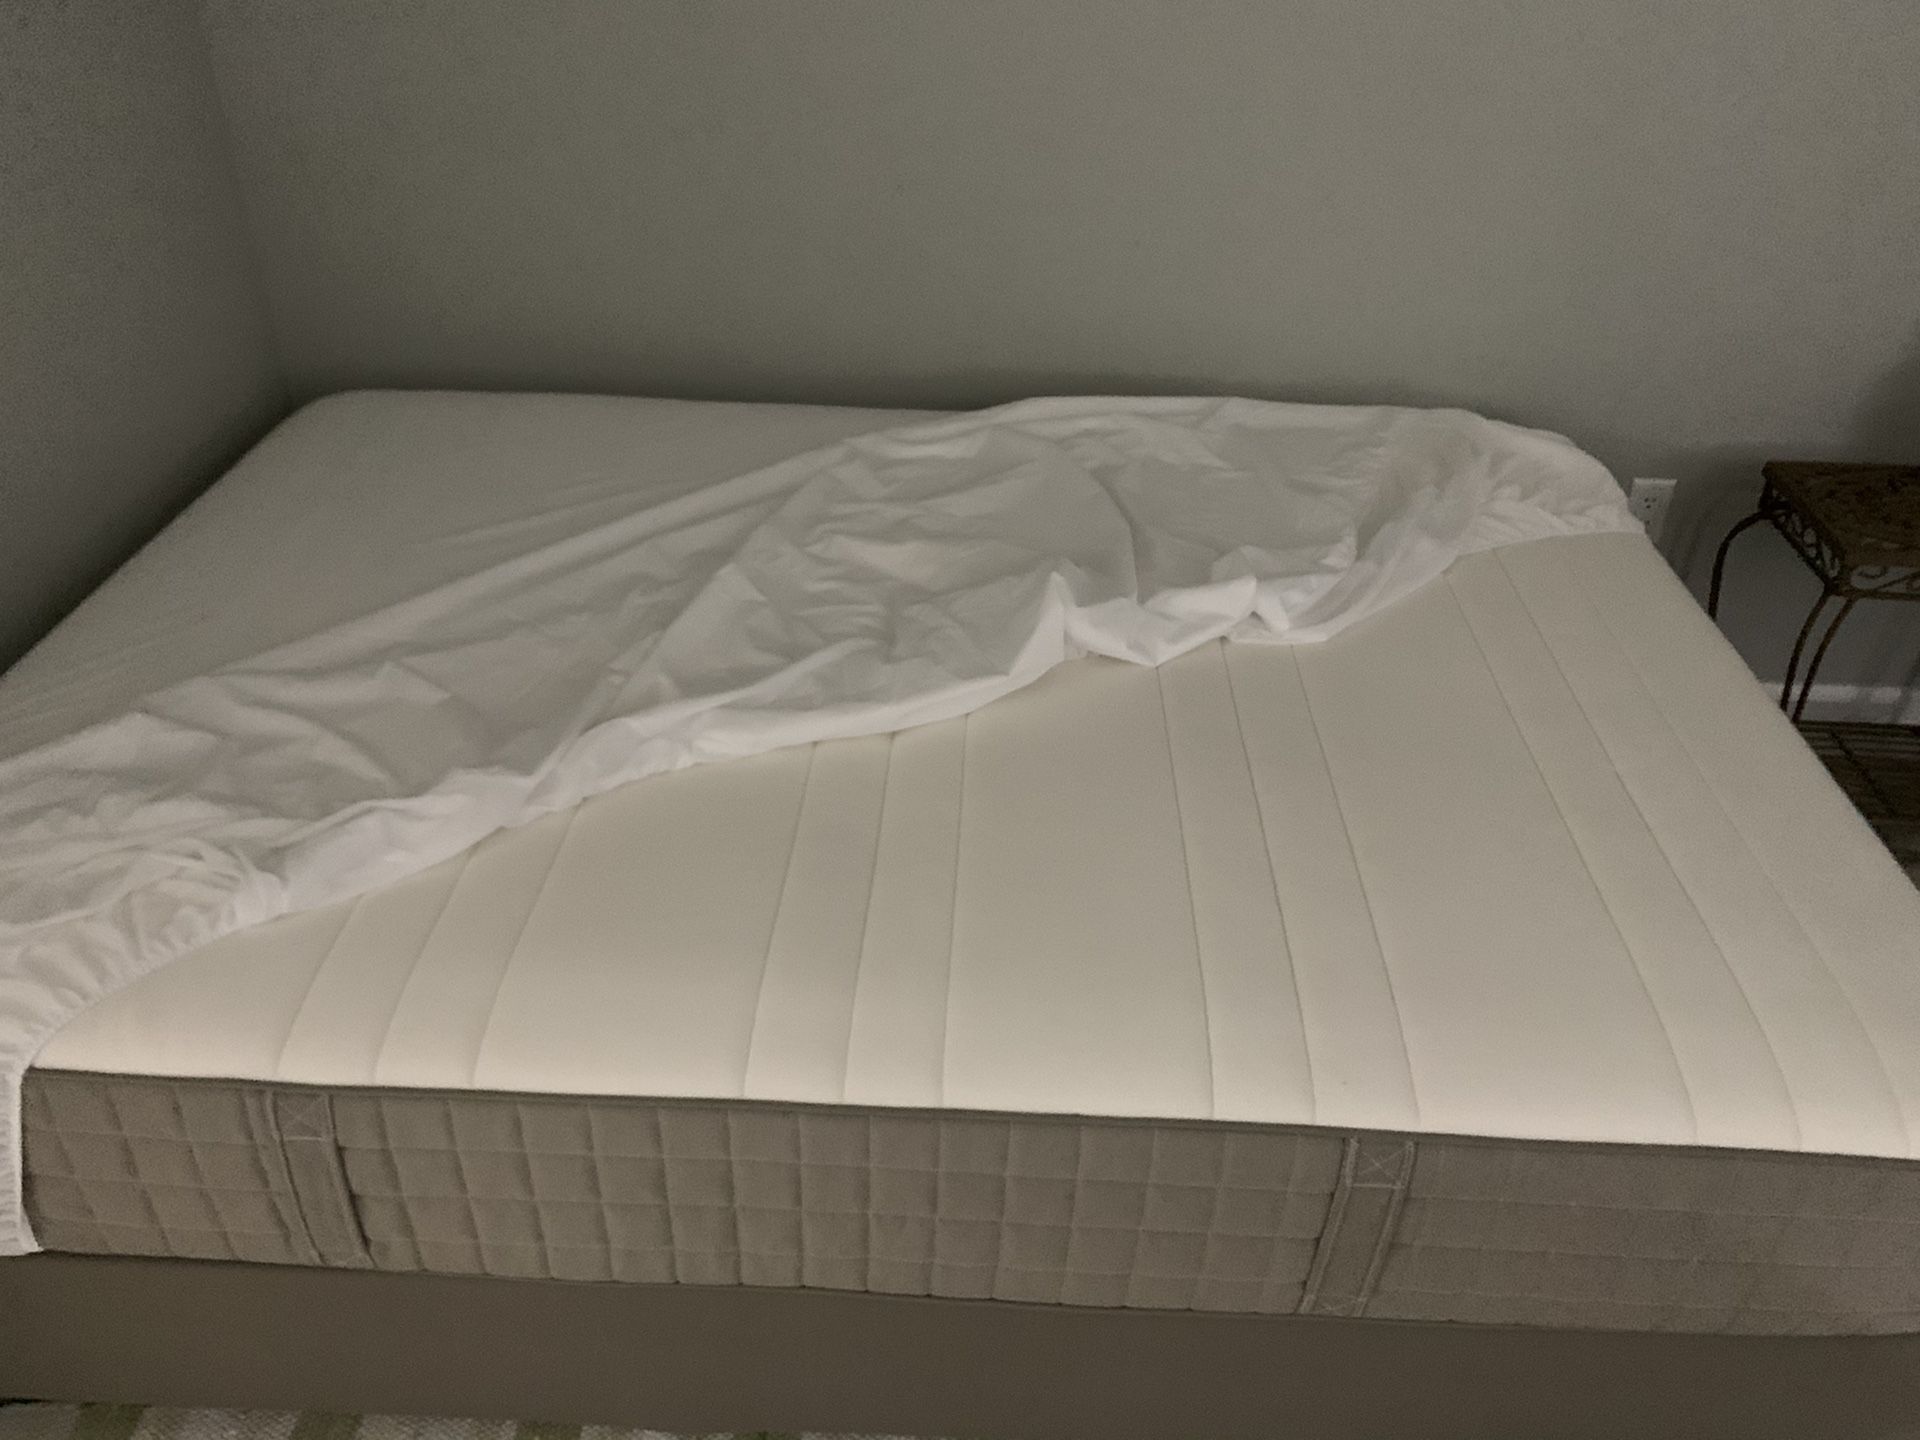 Full size mattress with box spring and legs.